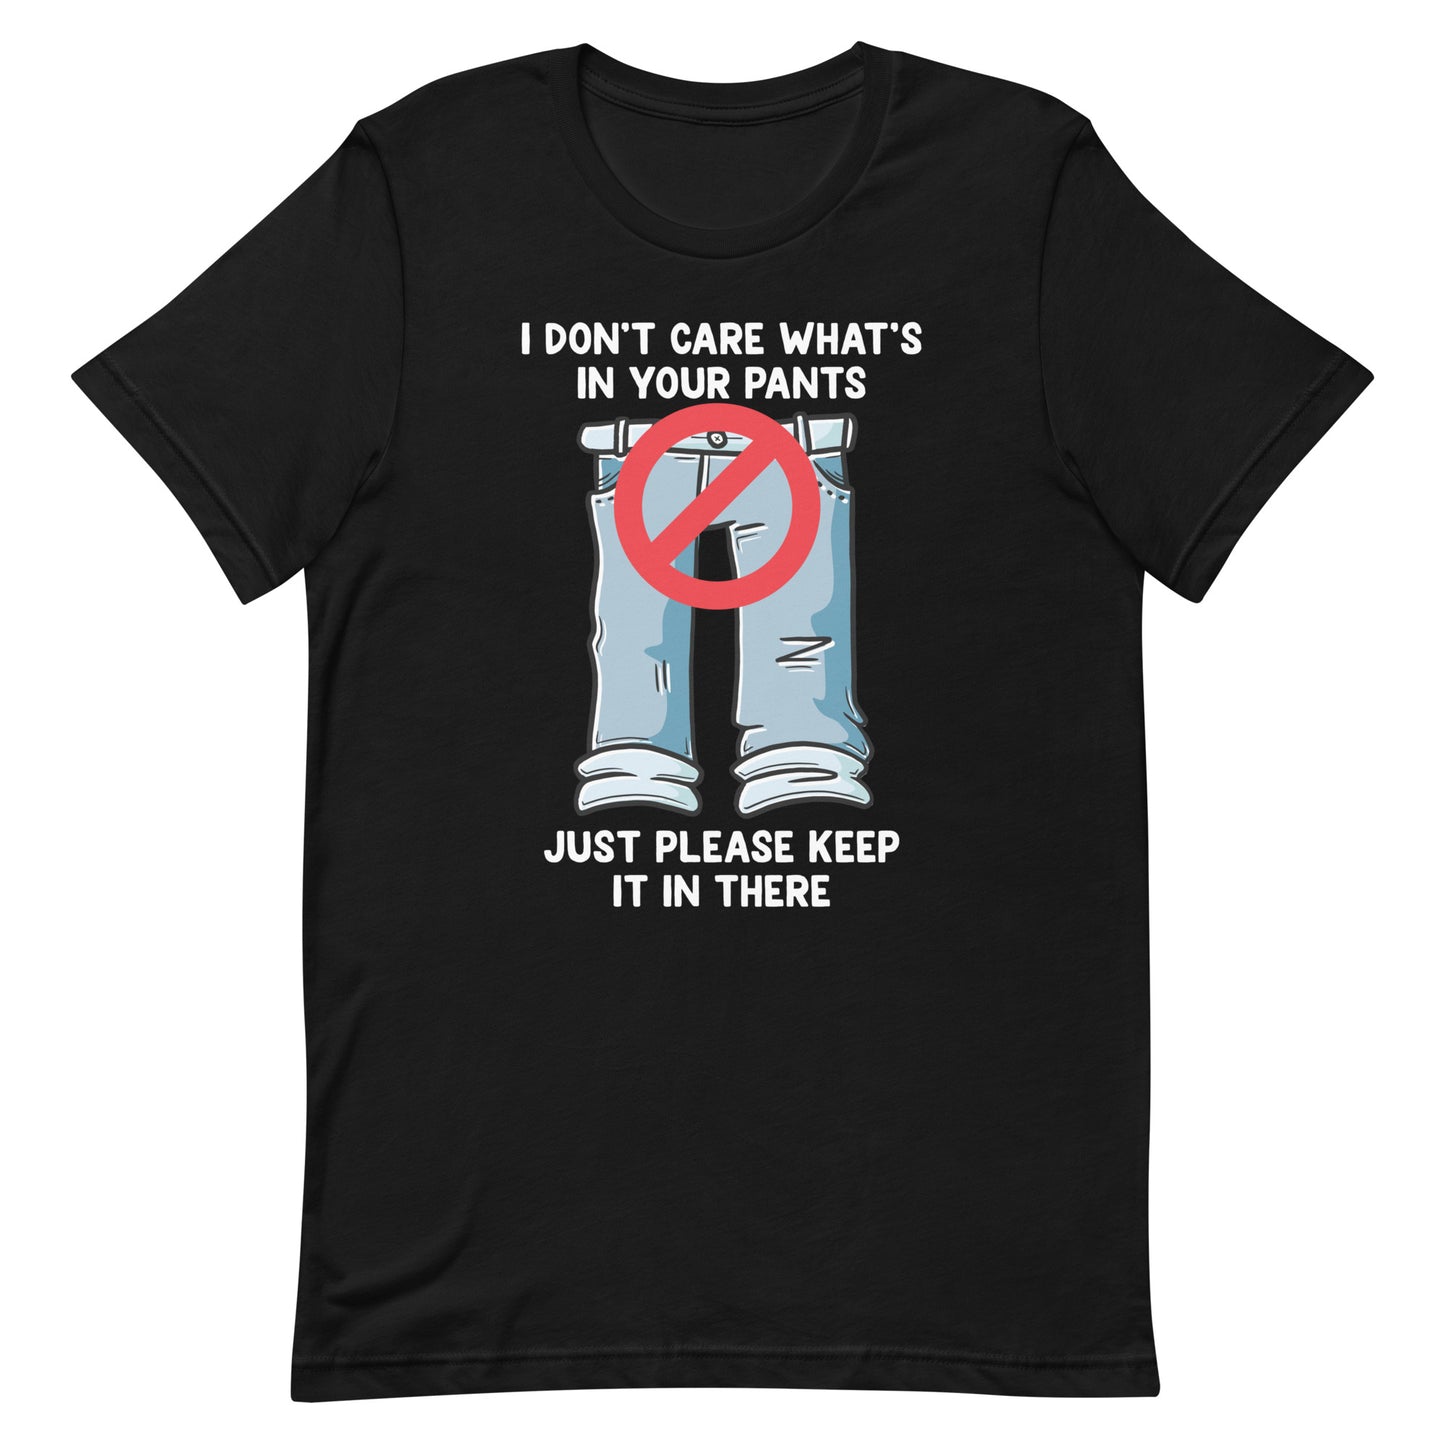 I Don't Care What's In Your Pants Unisex t-shirt